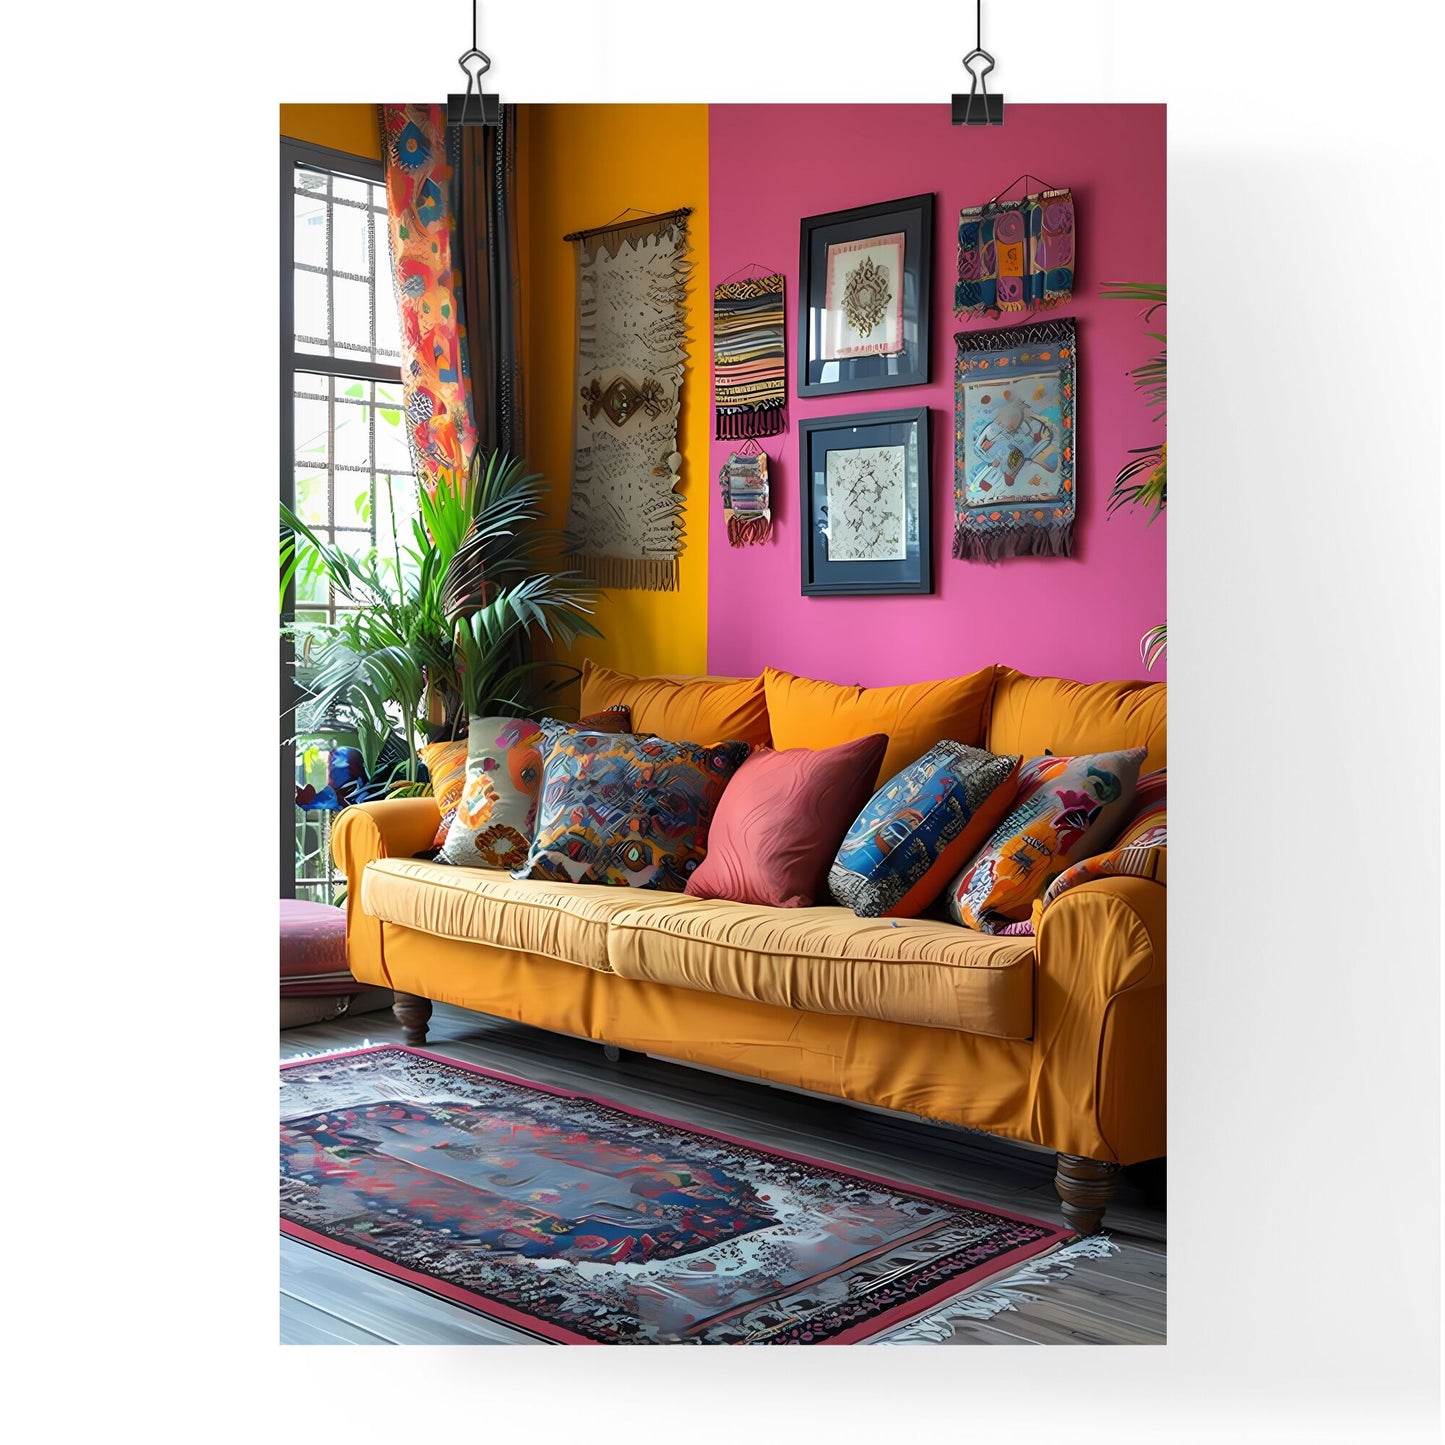 Colorful Bangladeshi Boho Art Painting: Couch with Pillows in Vibrant Pink Room with Rug Default Title